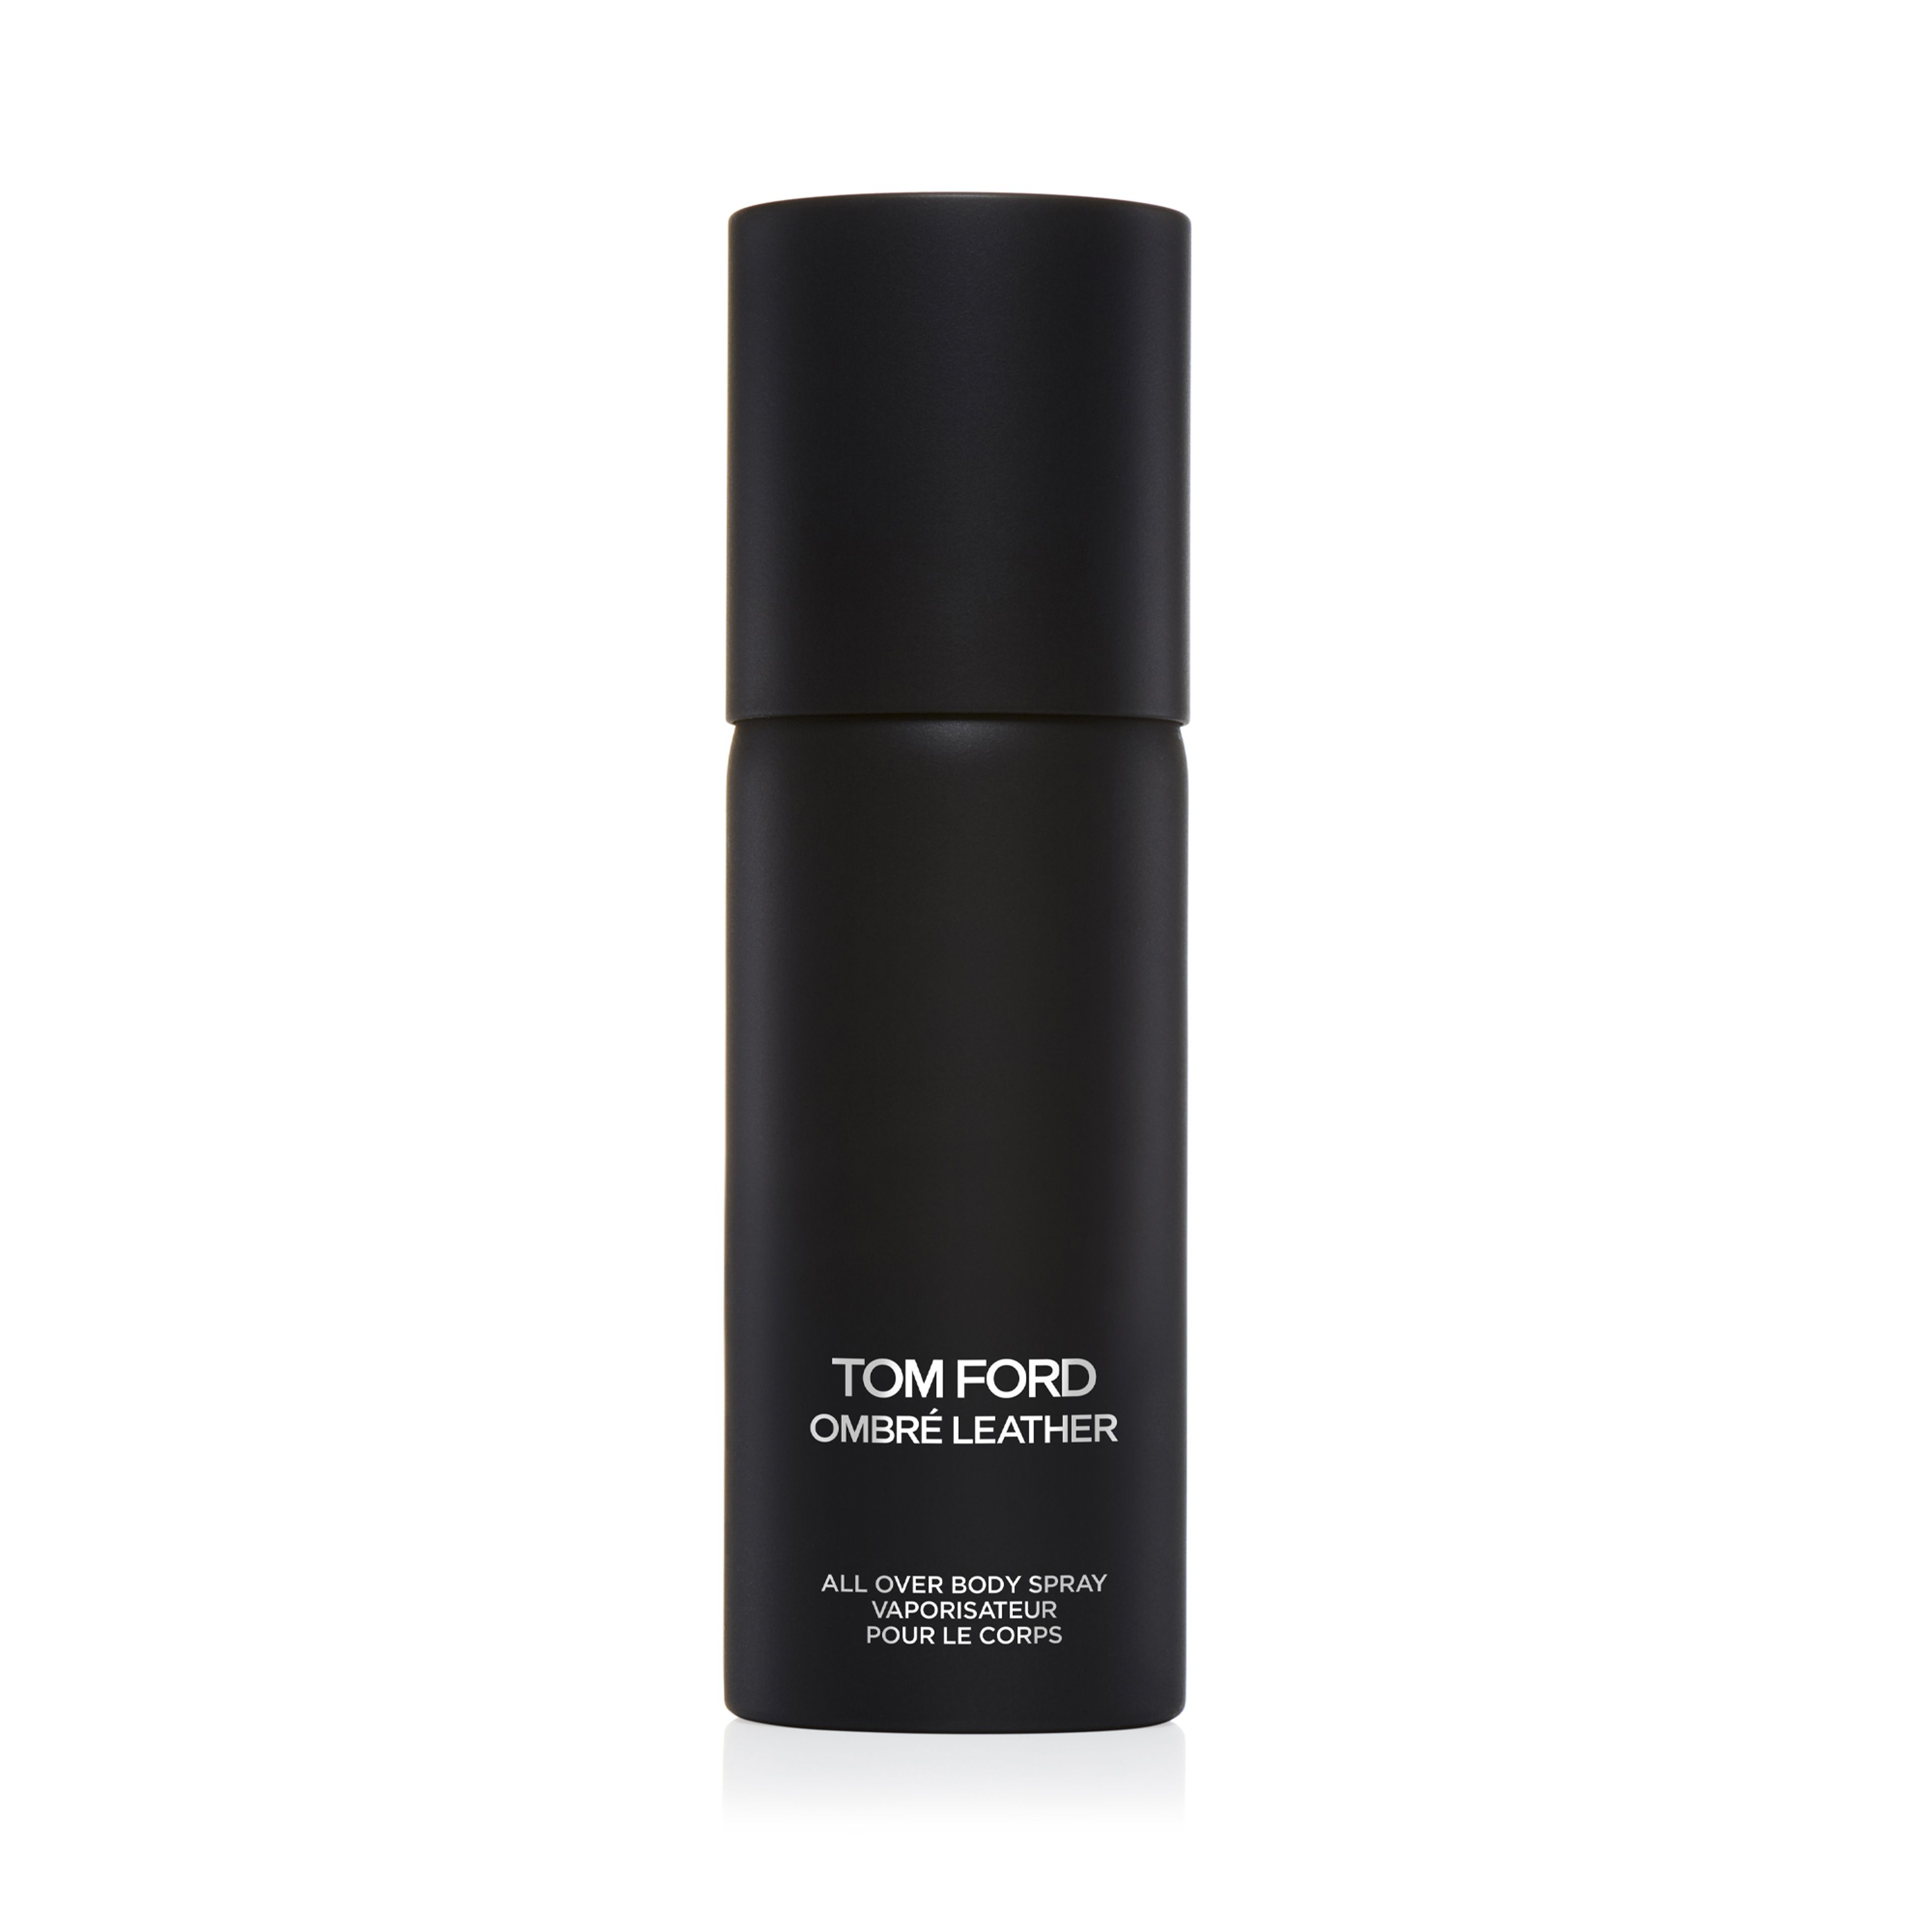 Tom Ford Ombre Leather 
all Over Body Spray 1